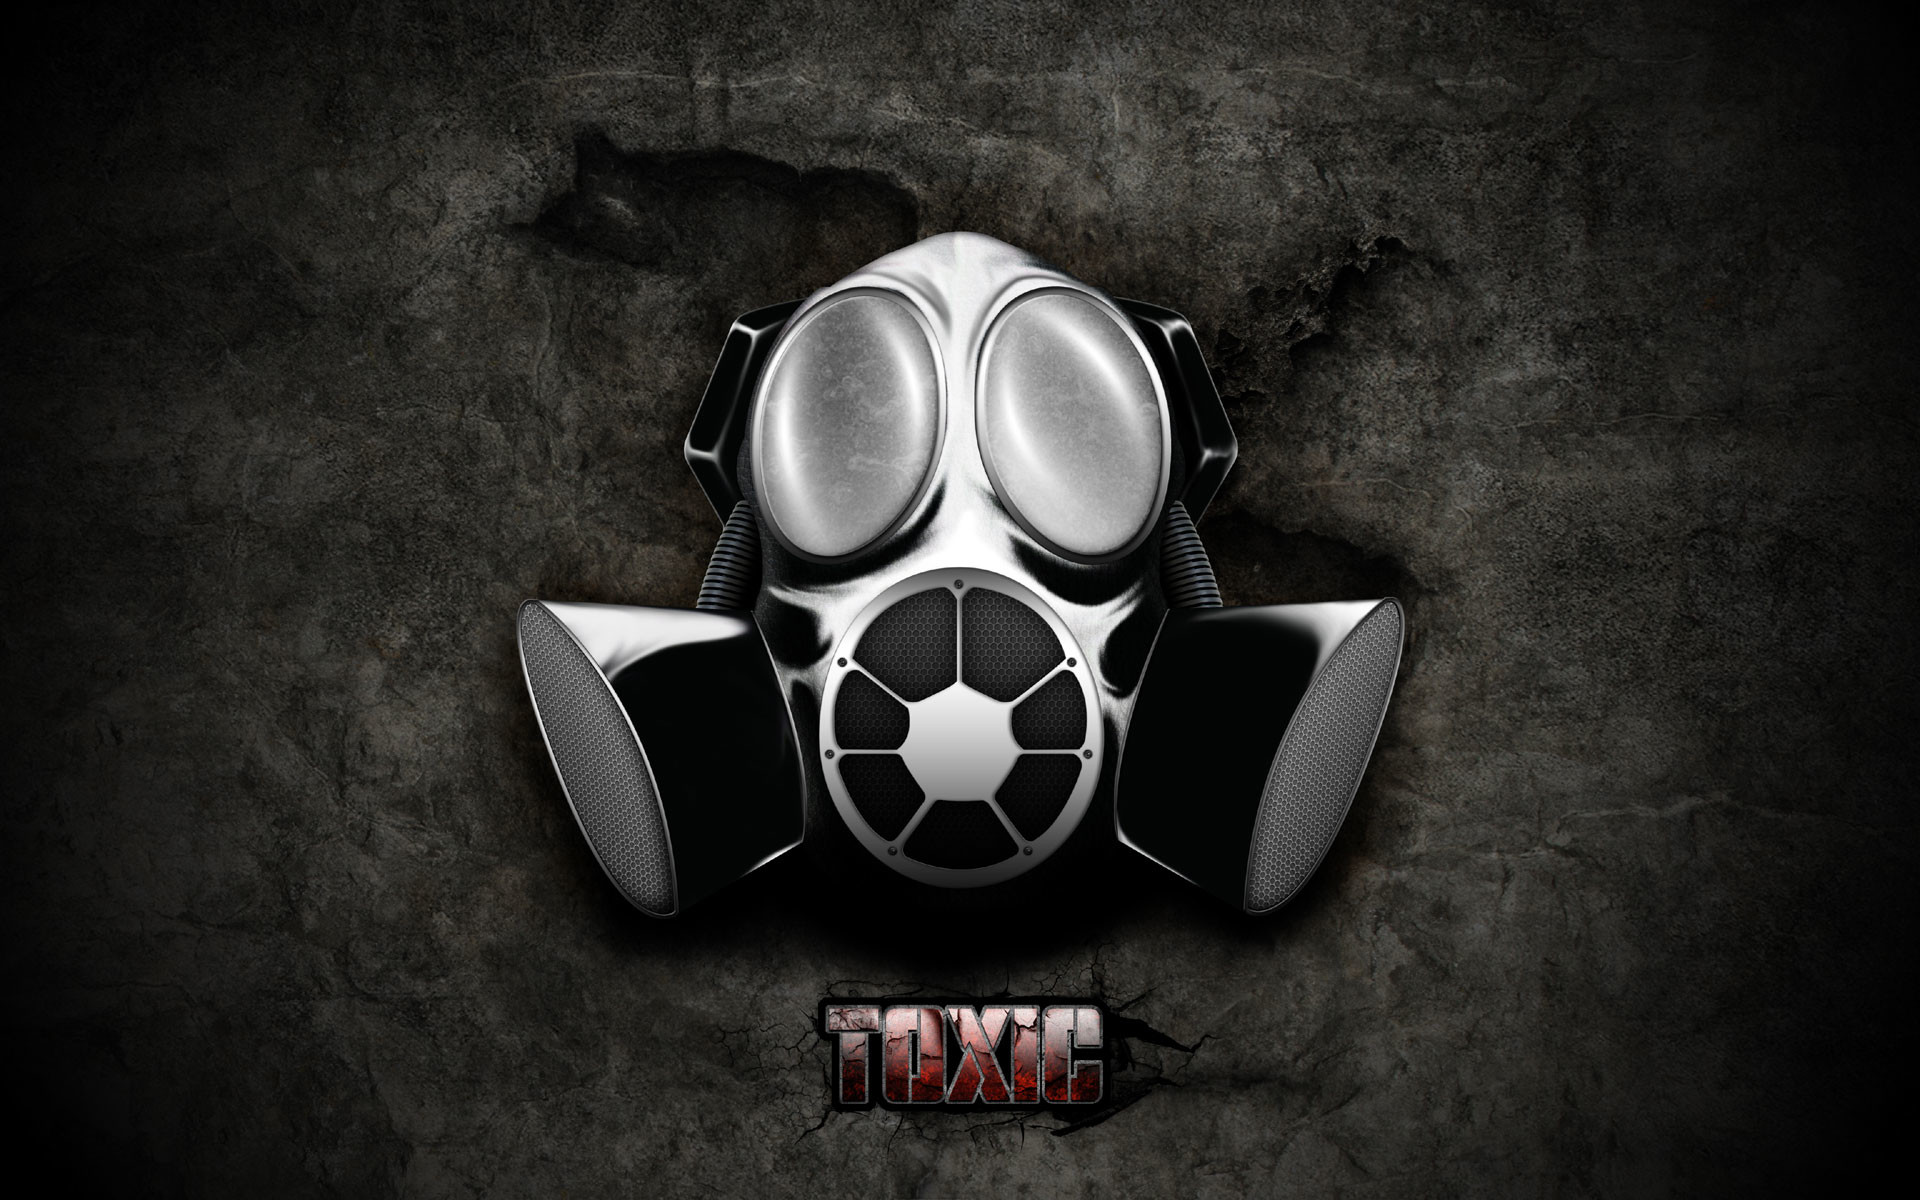 1920x1200 ... Toxic Wallpapers, Toxic Image Galleries, 37 | Fungyung Backgrounds ...